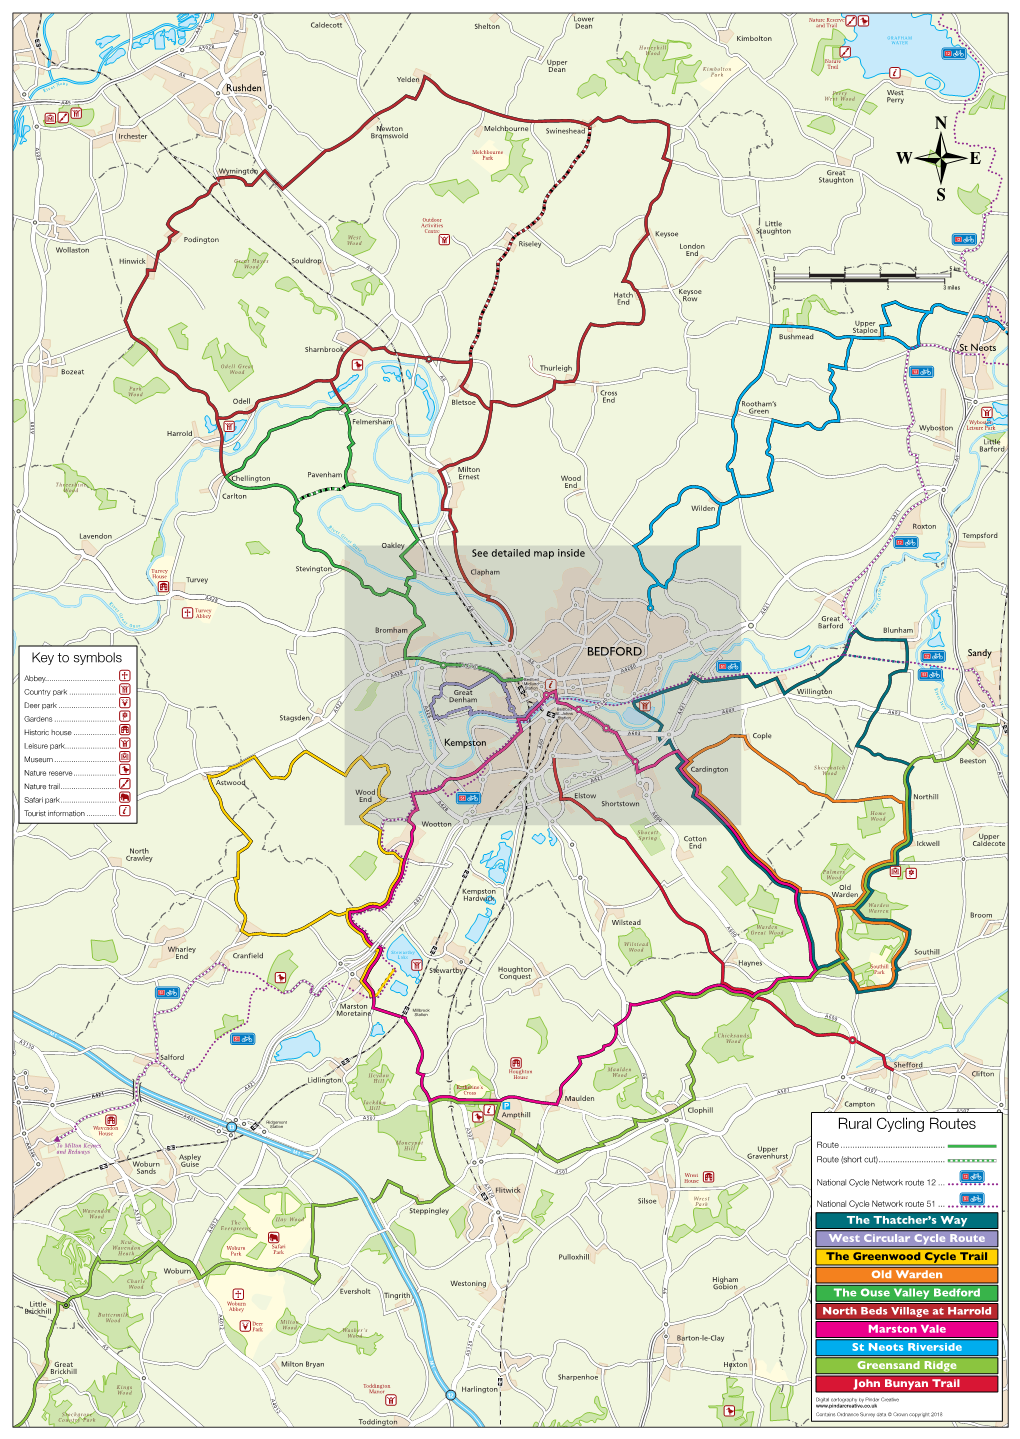 Rural Cycling Routes 5 House 0 7 a Moneypot 1 4 to Milton Keynes Route